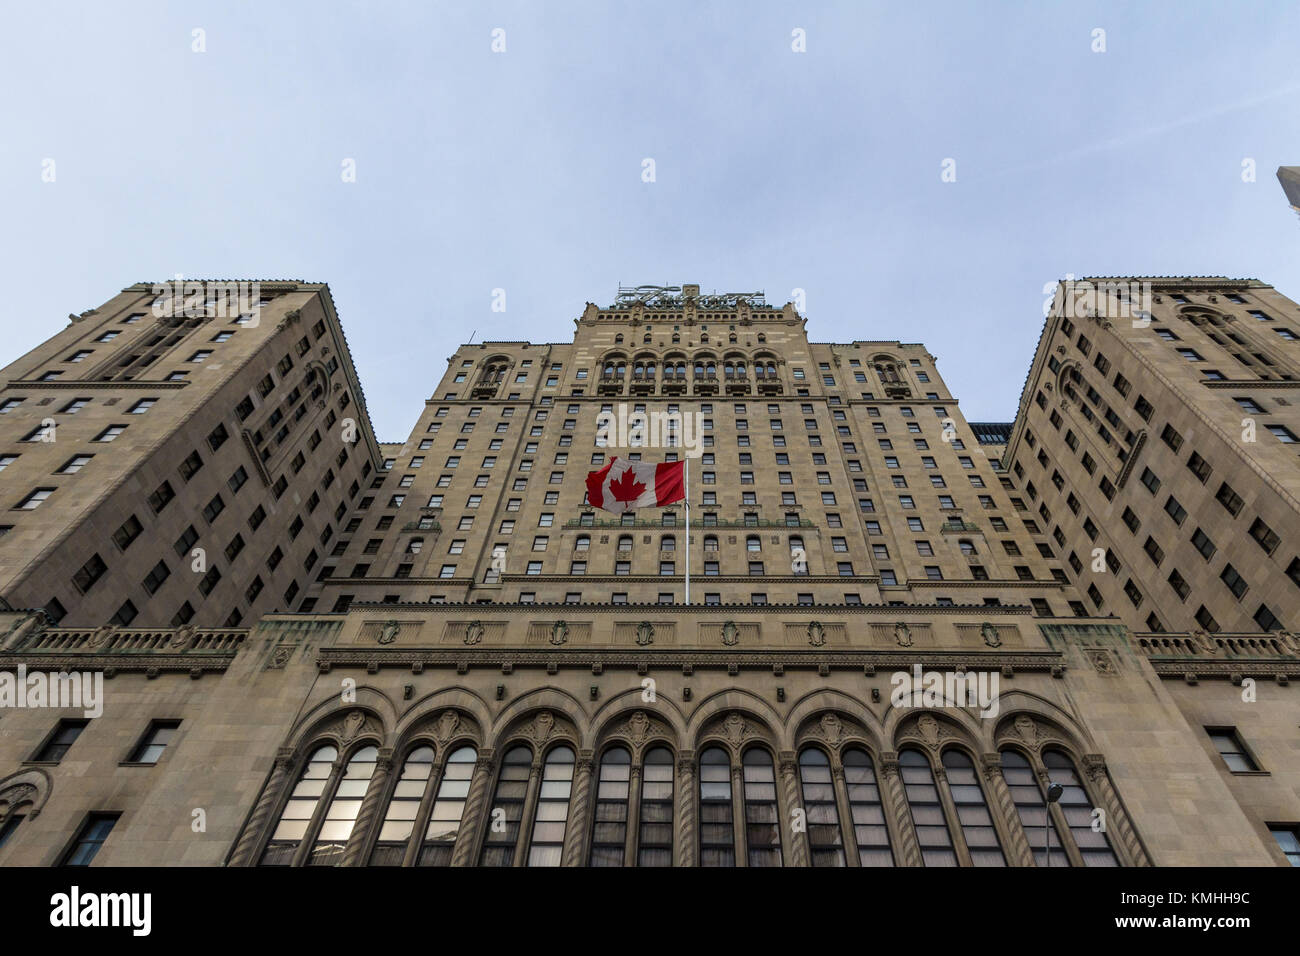 TORONTO, CANADA - DECEMBER 31, 2016: Fairmont Royal York hotel in Toronto, Ontario, seen from the bottom with a Canadian flag waiving. This luxury hot Stock Photo